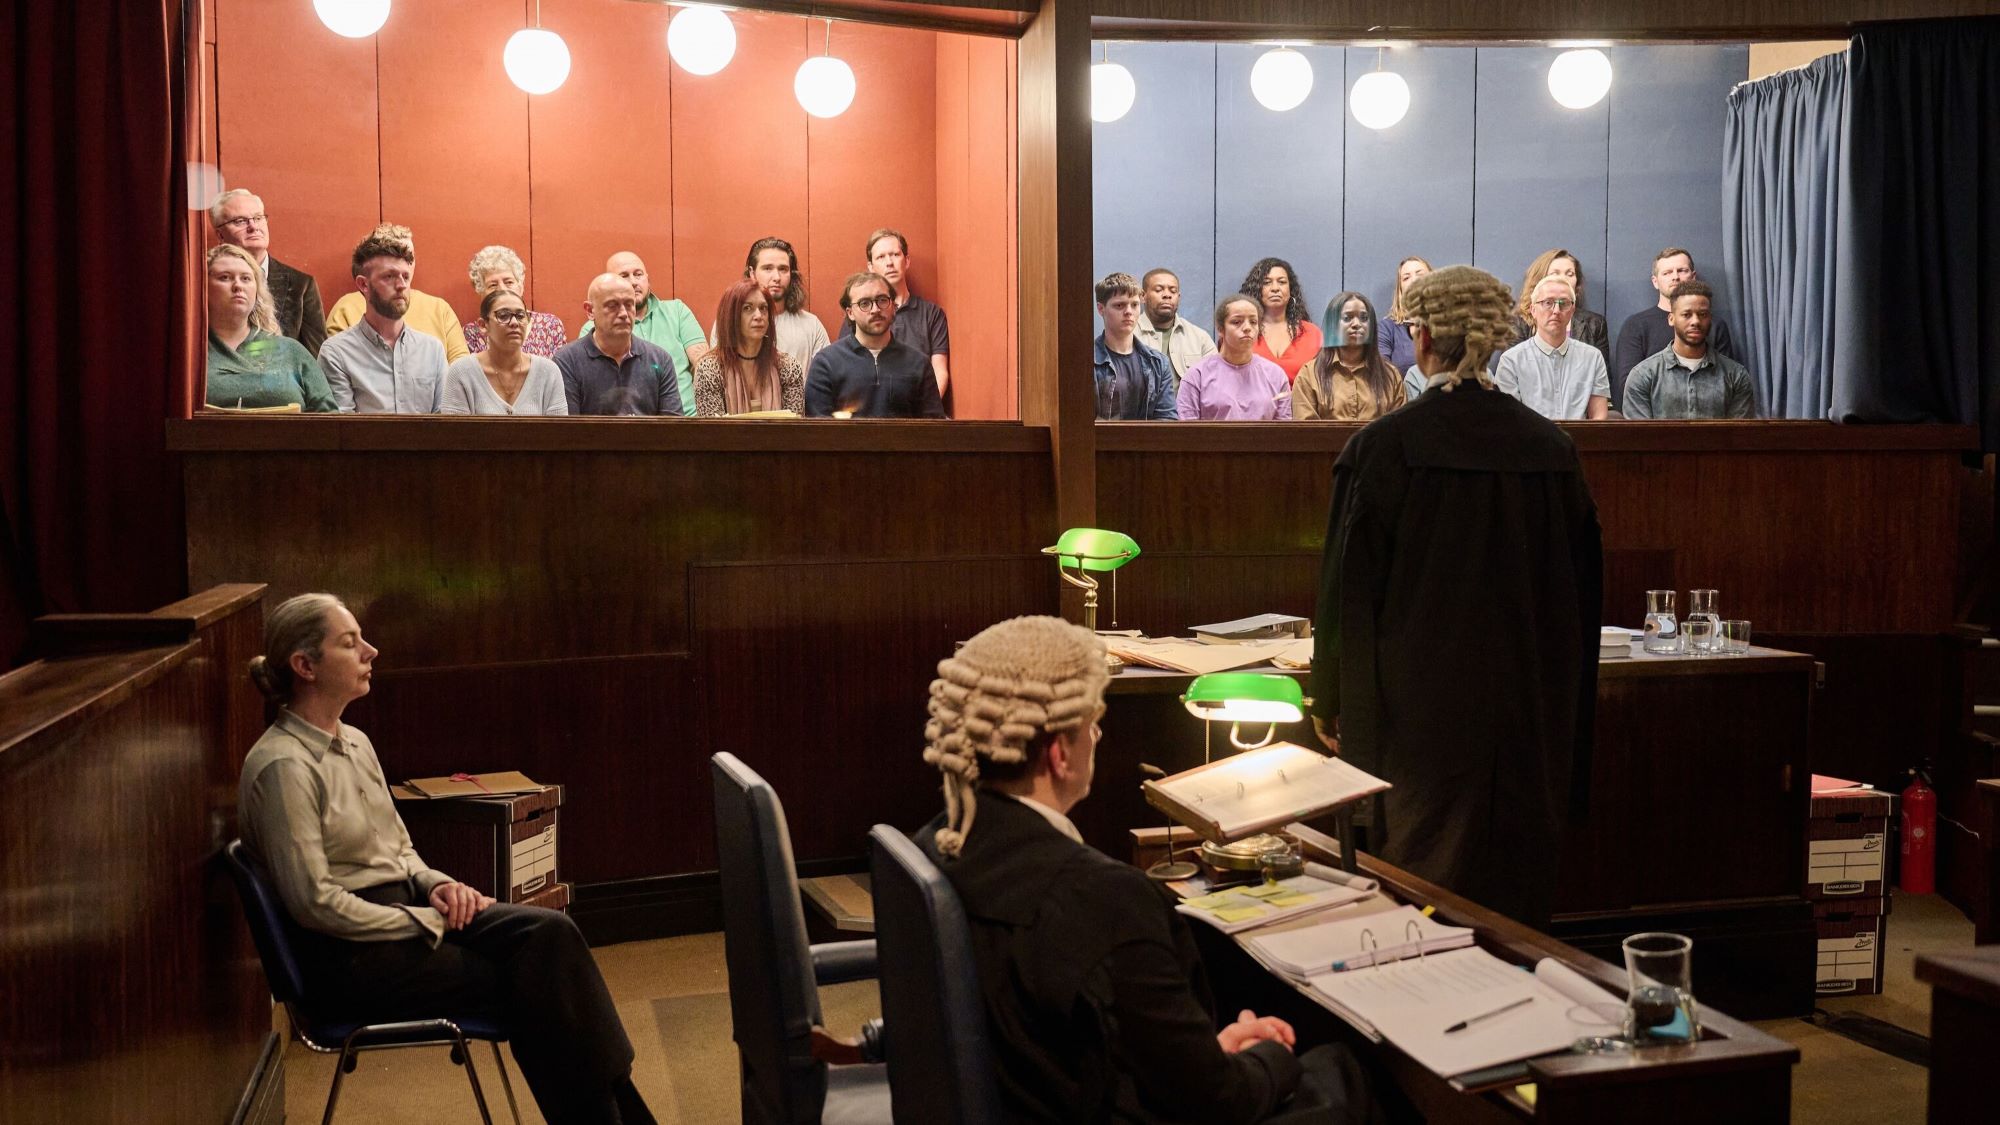 The Jury: Murder Trial on Channel 4